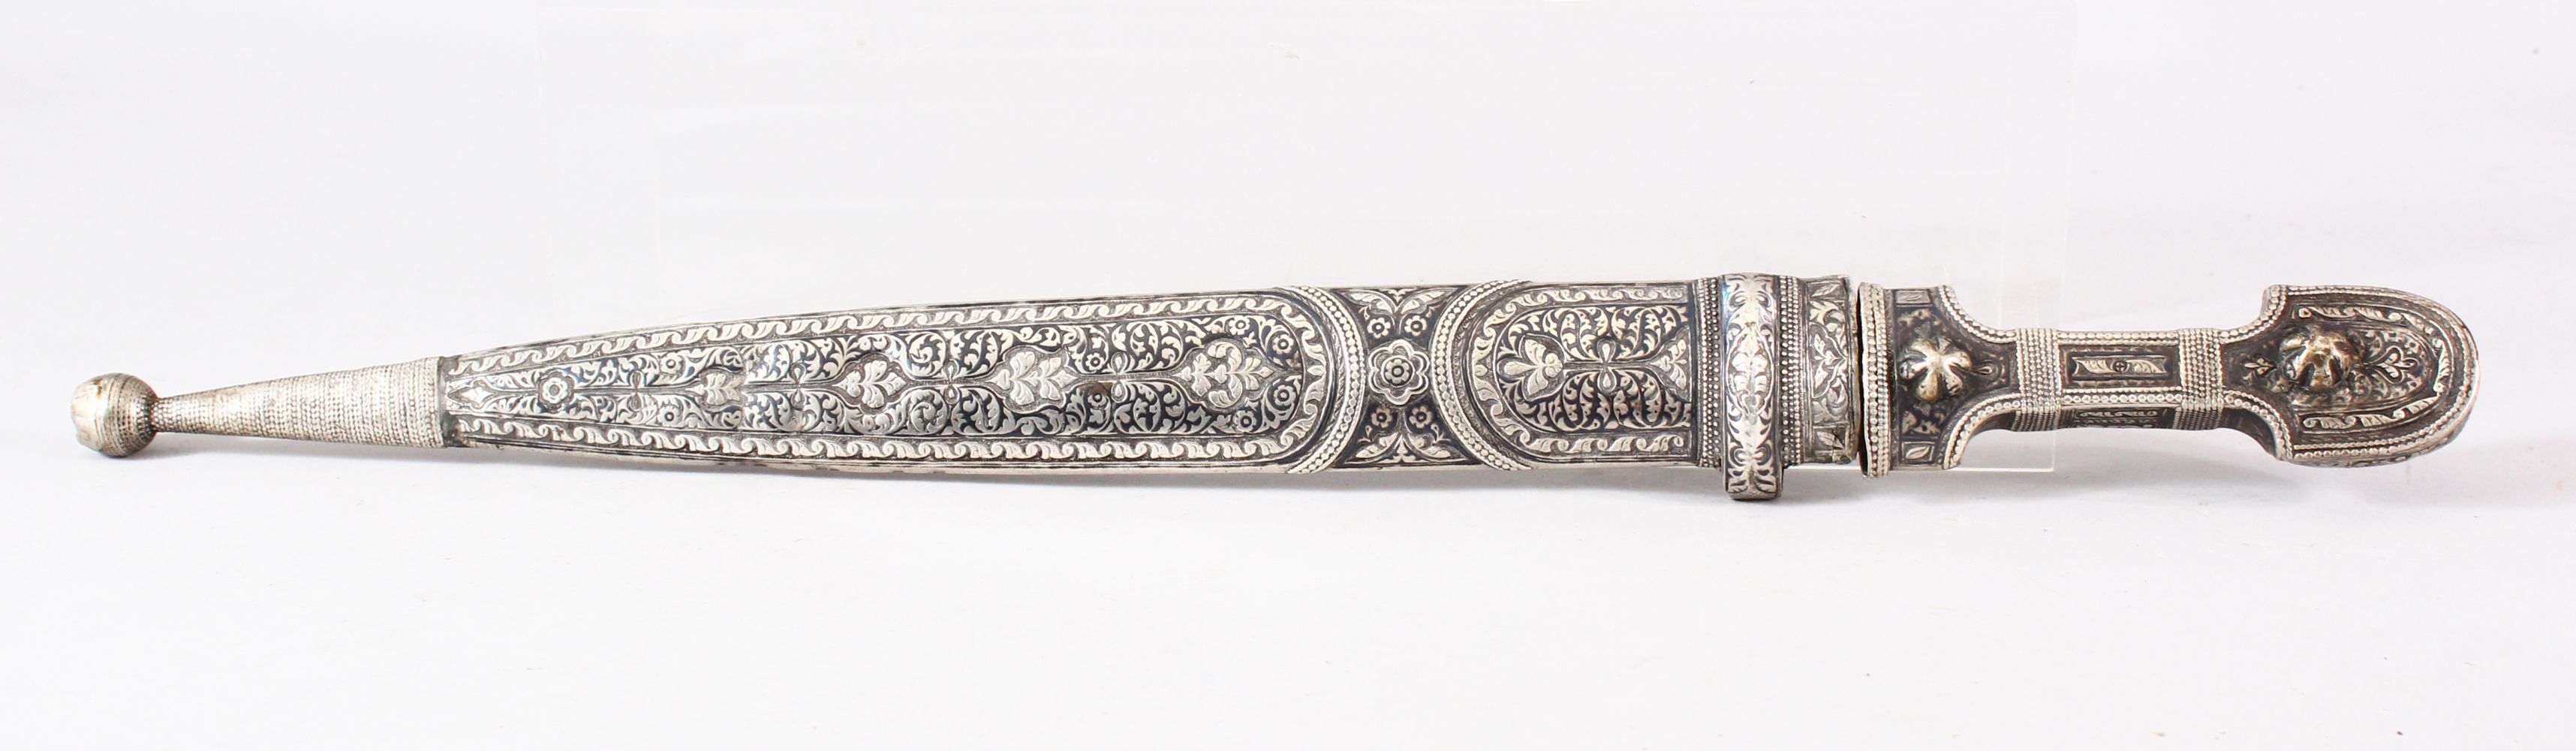 A 19TH CENTURY KINDJAL DAGGER and scabbard, 47.5cm long.